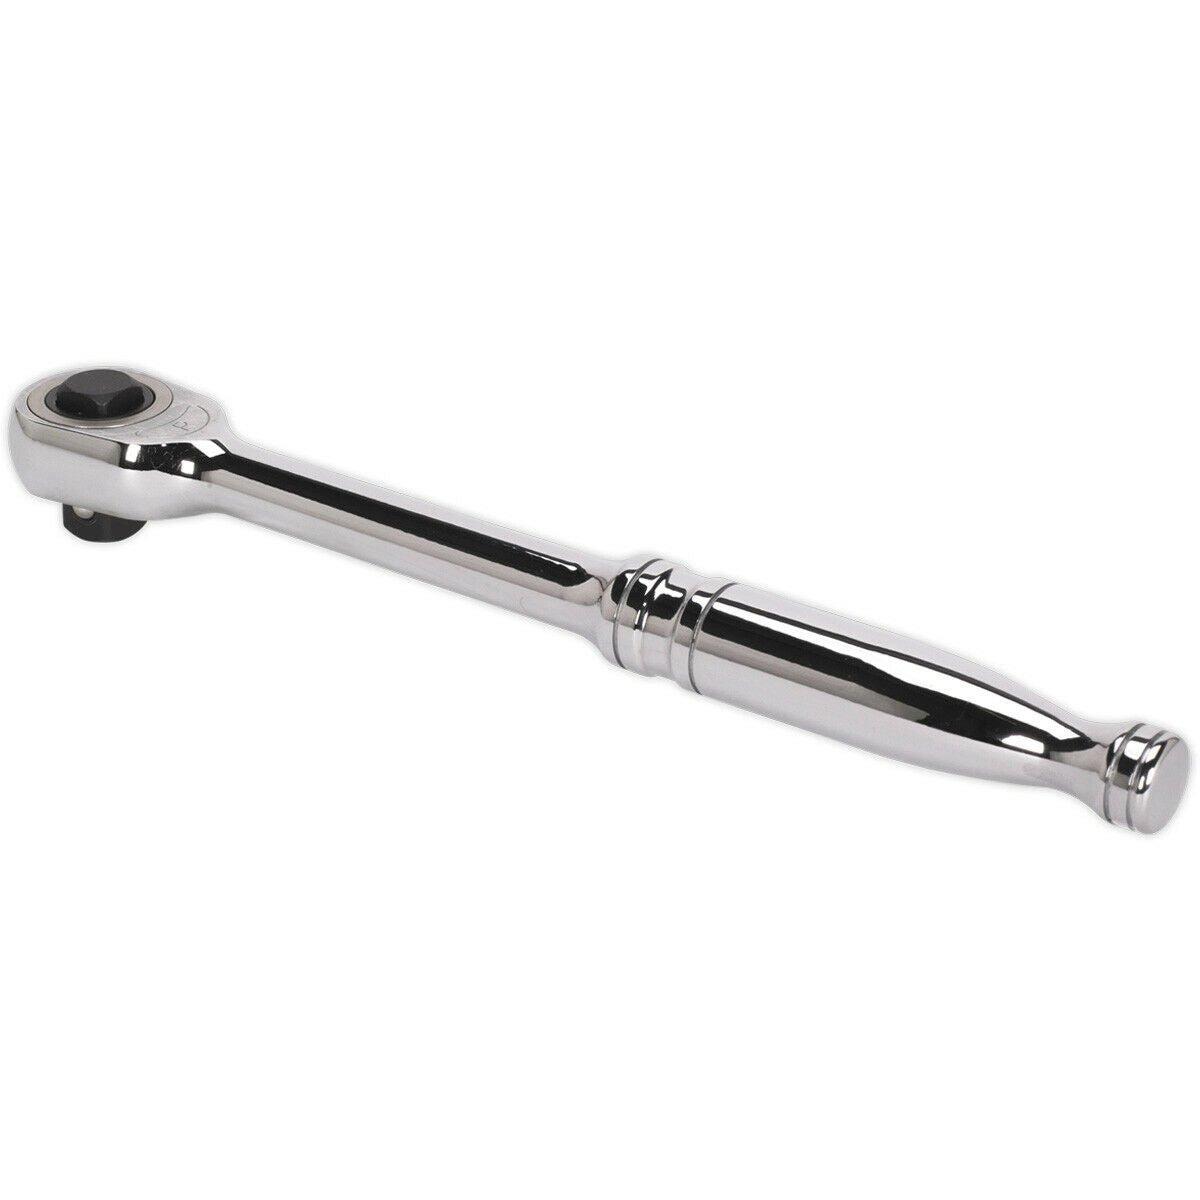 Gearless Ratchet Wrench - 1/2 Inch Sq Drive - Push-Through Reverse Steel Wrench